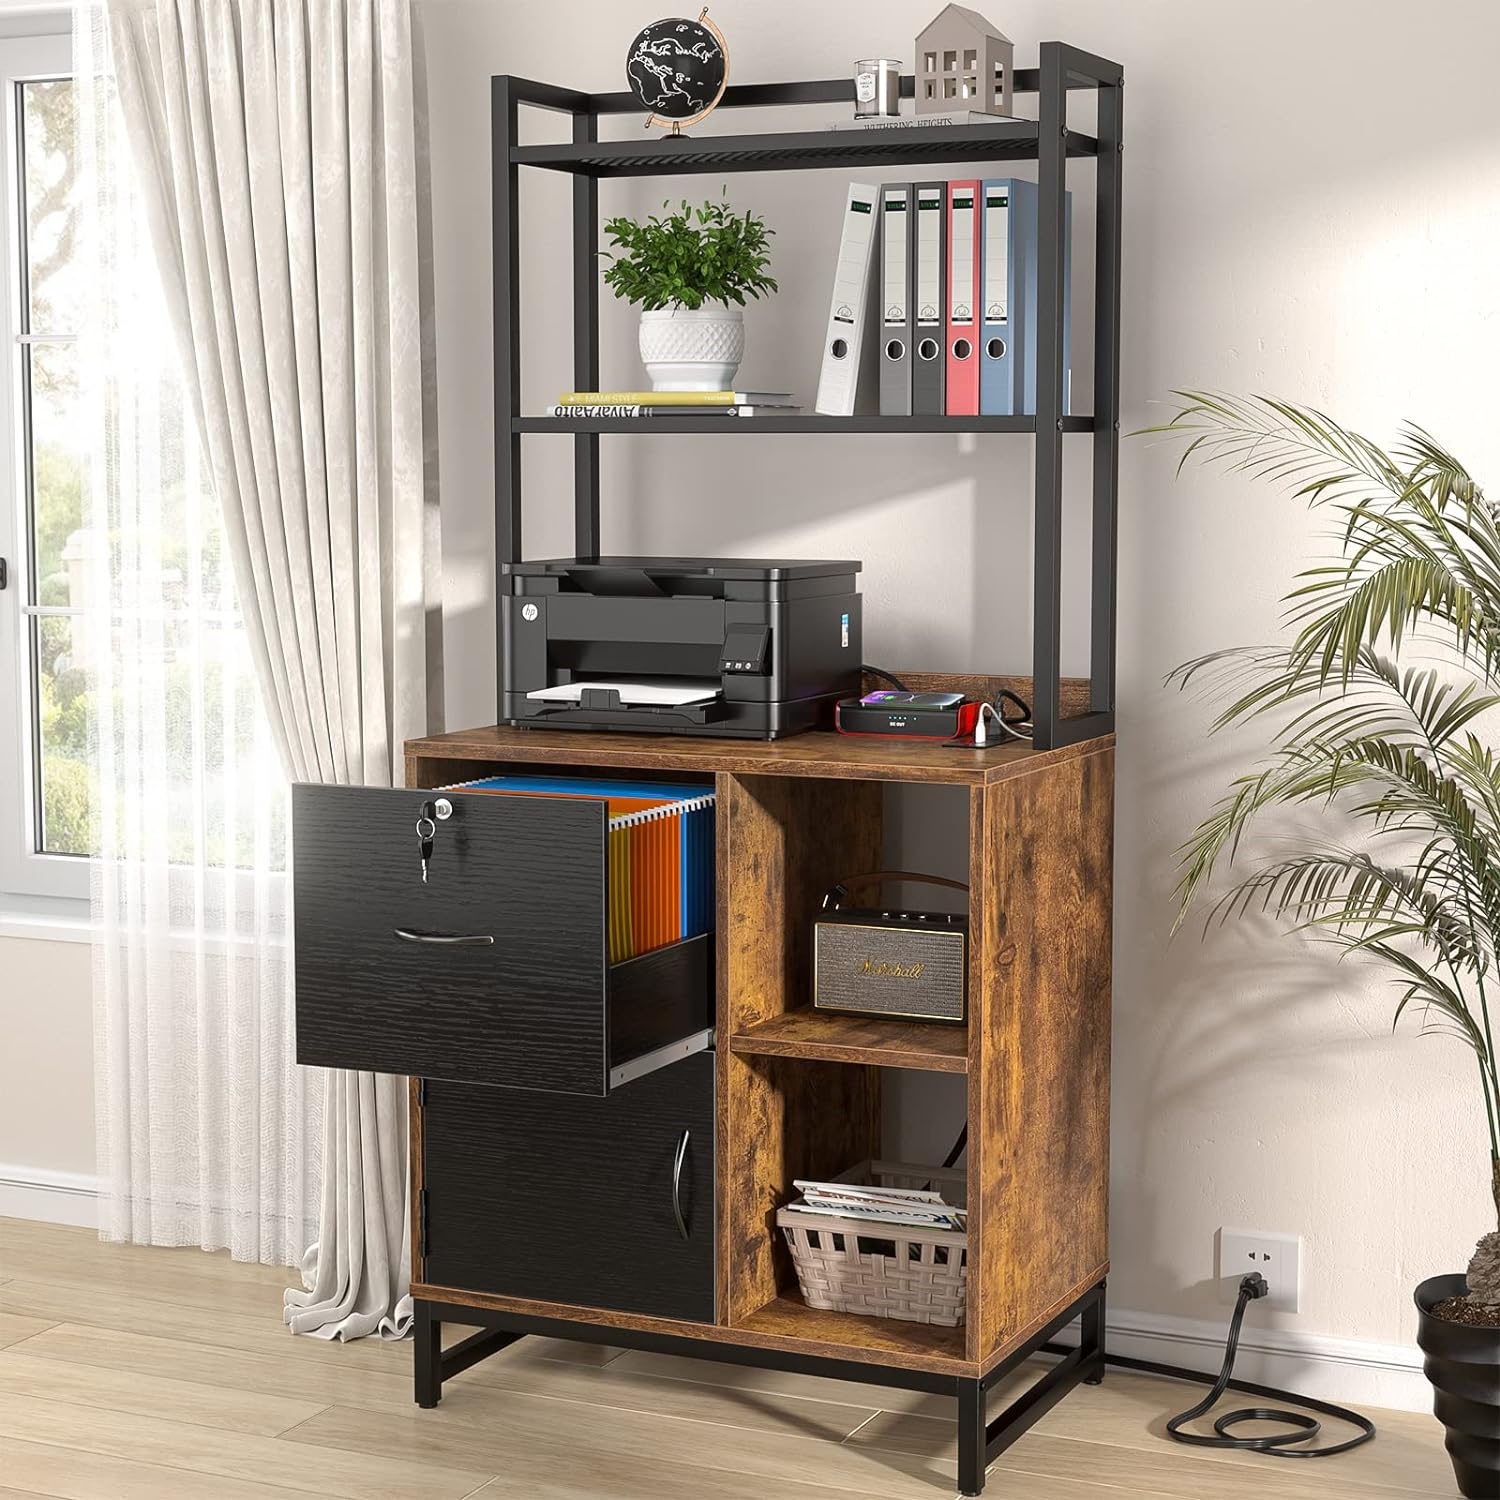 Bookcase with filing cabinet base, as the name suggests, is a kind of furniture that combines bookcase and filing cabinet. It can meet both your needs for storing books and your needs for storing files, making it ideal for office and home use.